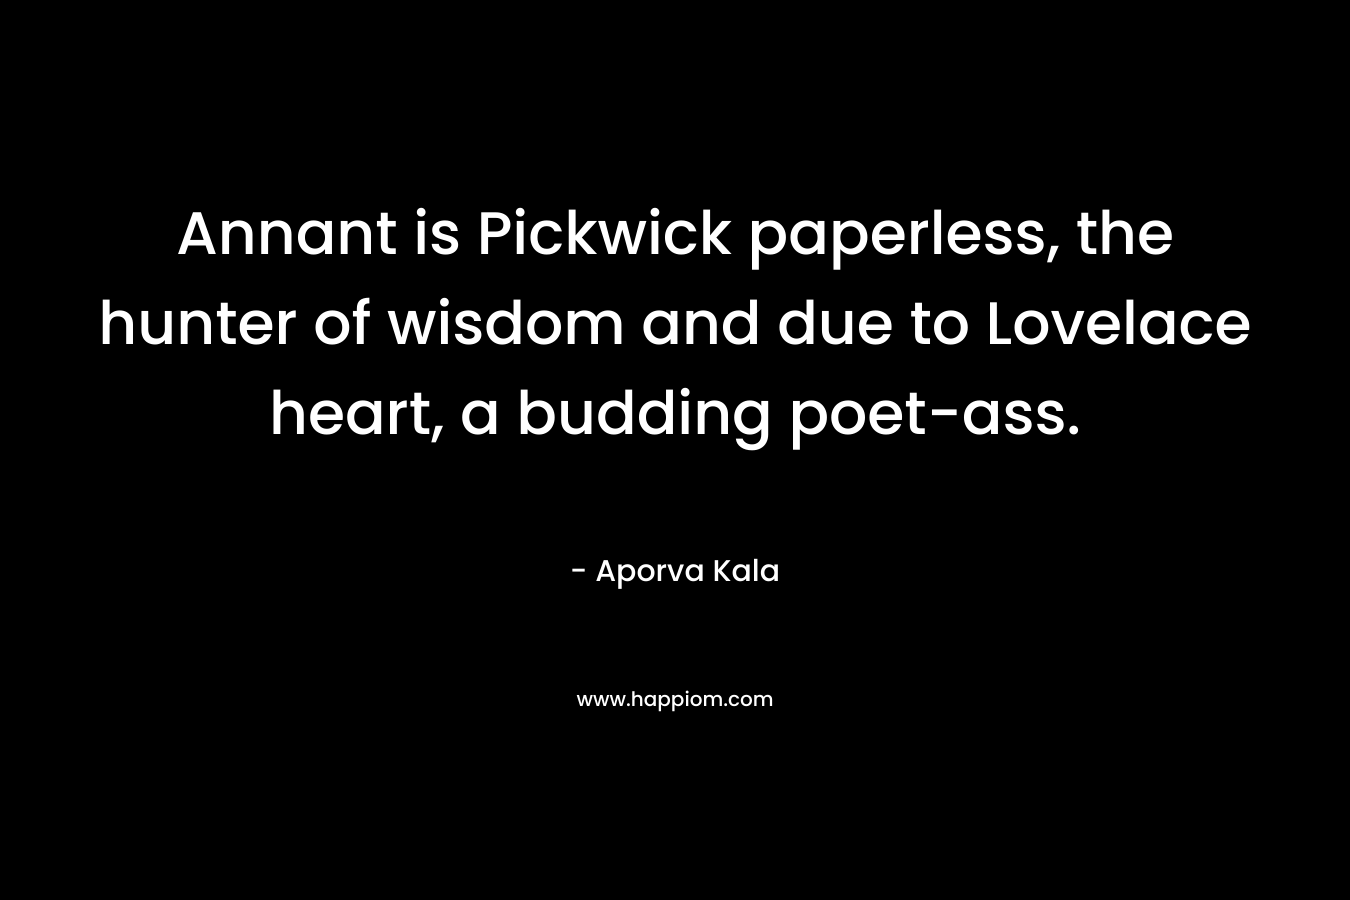 Annant is Pickwick paperless, the hunter of wisdom and due to Lovelace heart, a budding poet-ass.